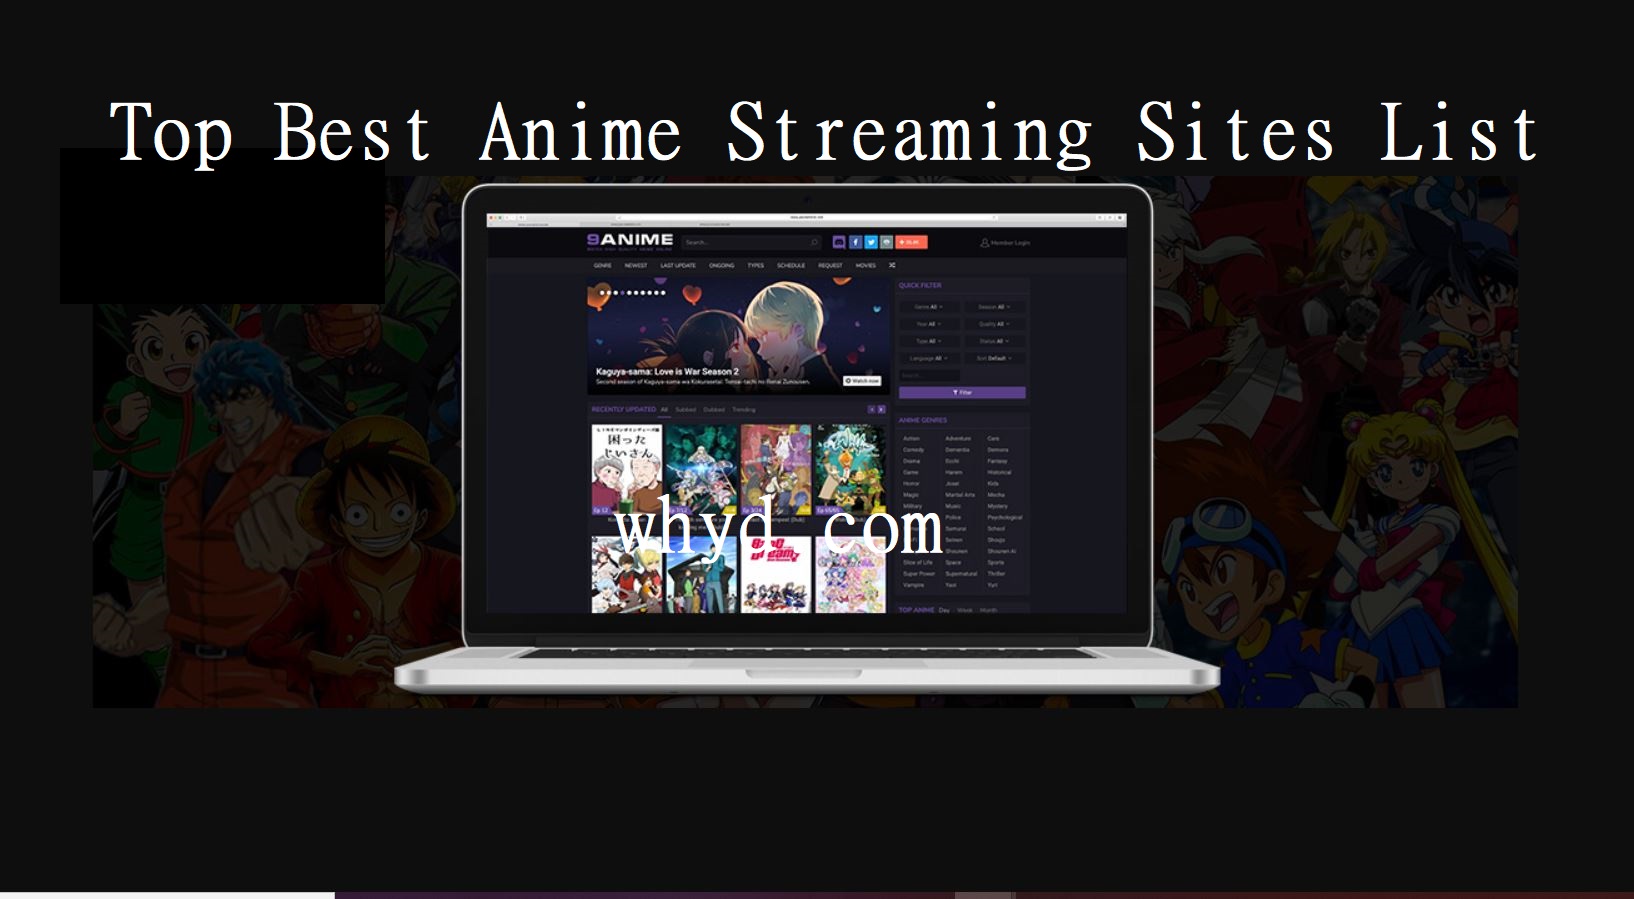 Top Best Anime Streaming Sites List